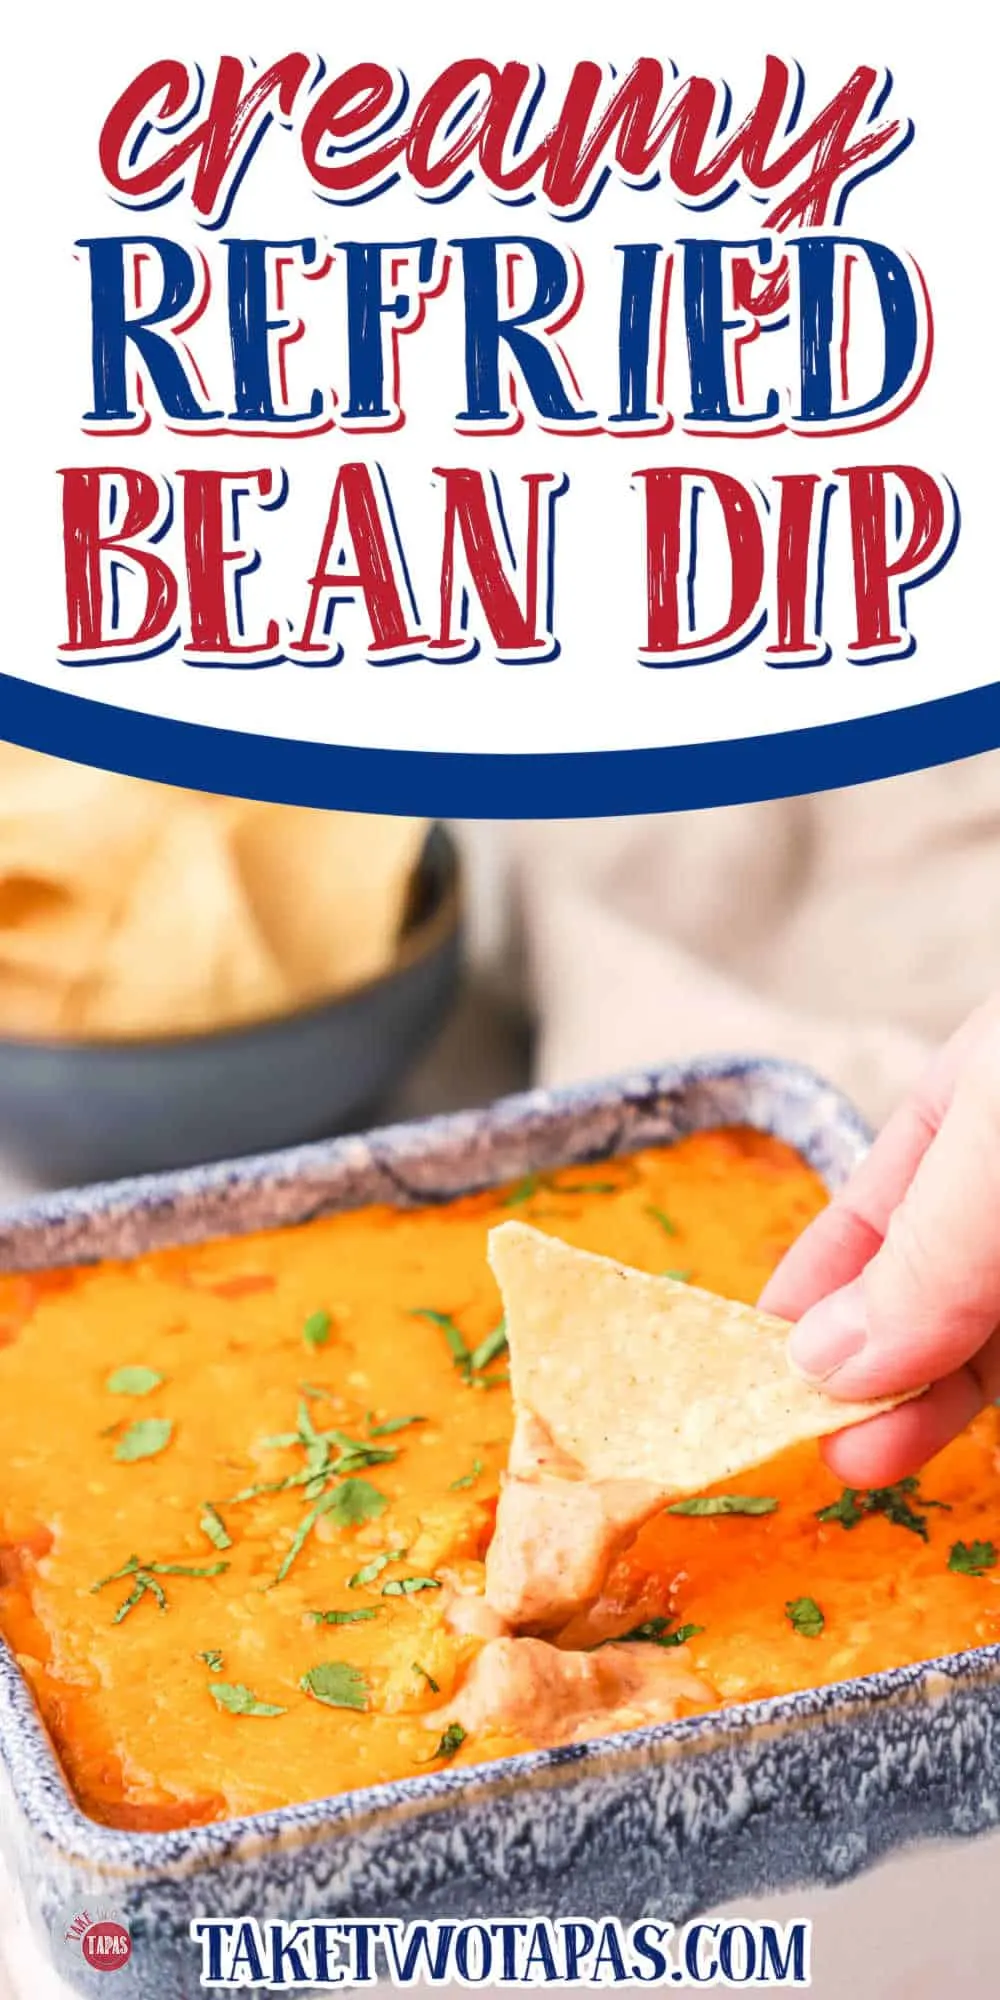 chip and dip with text "creamy refried bean dip"